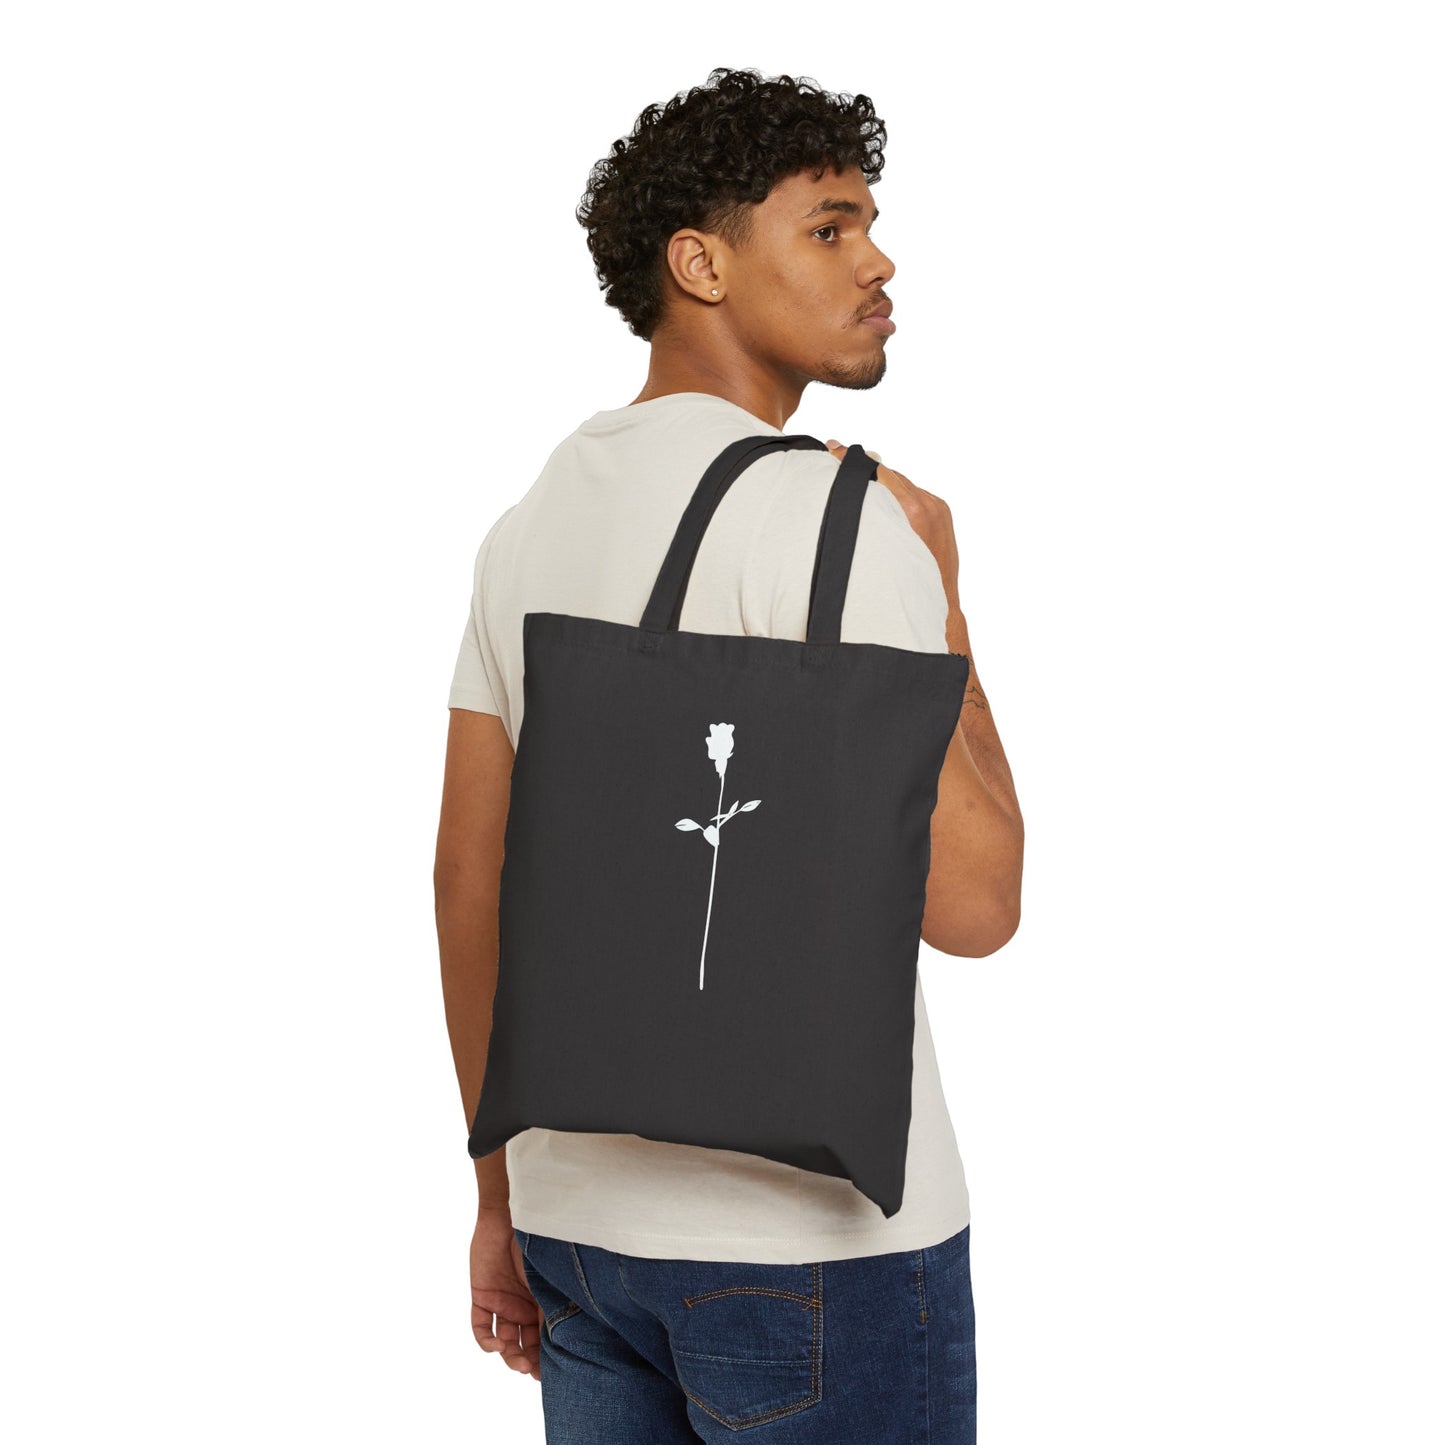 Dead and Gone Tote Bag